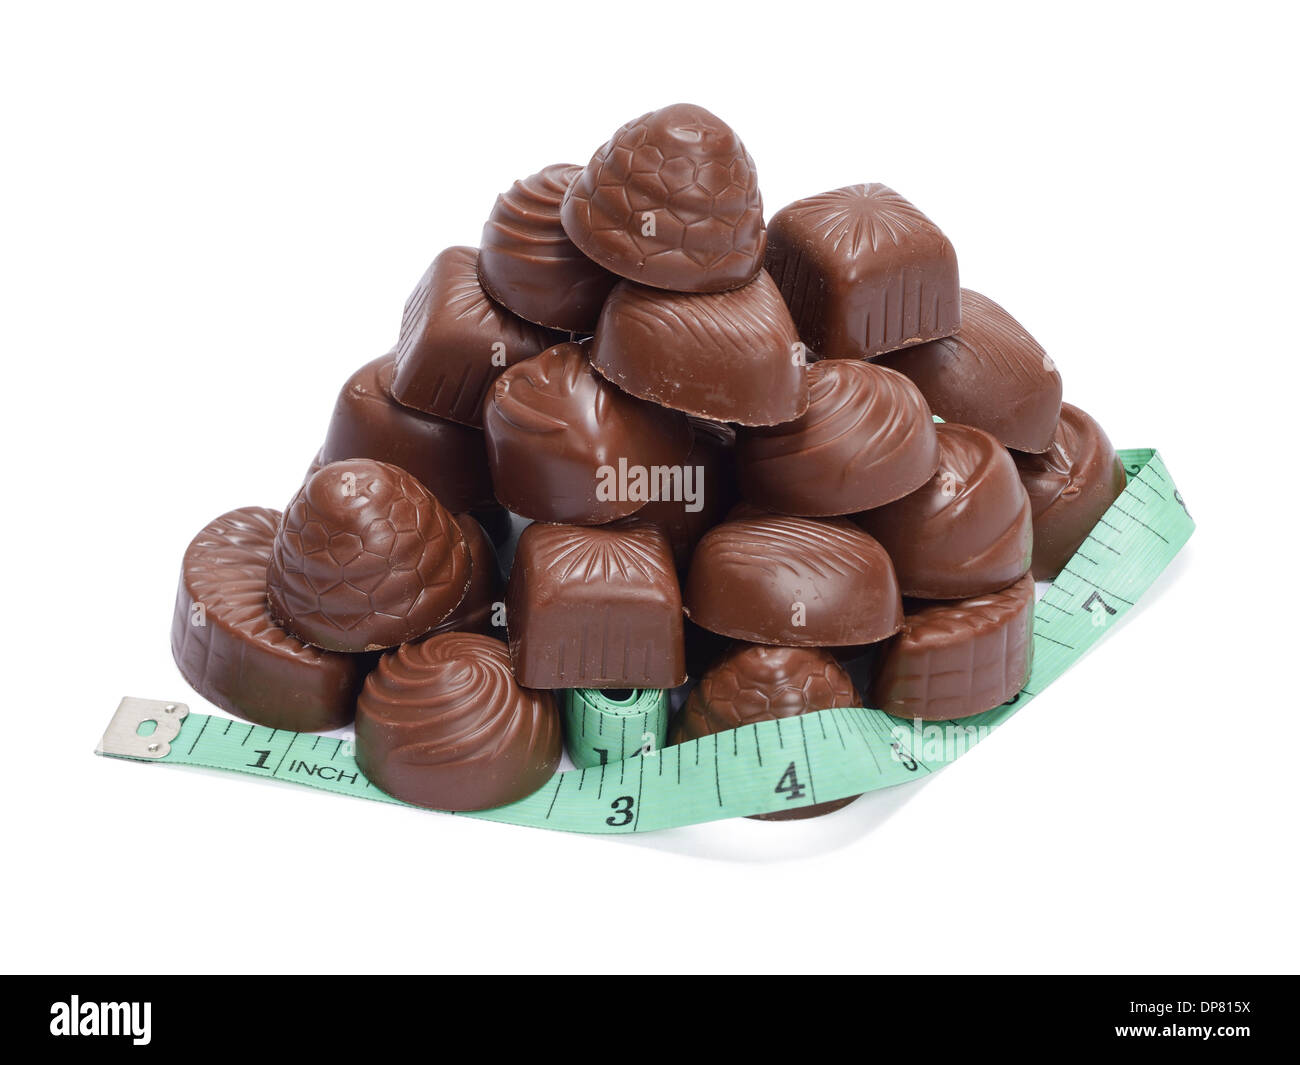 Pile of chocolates and a measuring tape Stock Photo